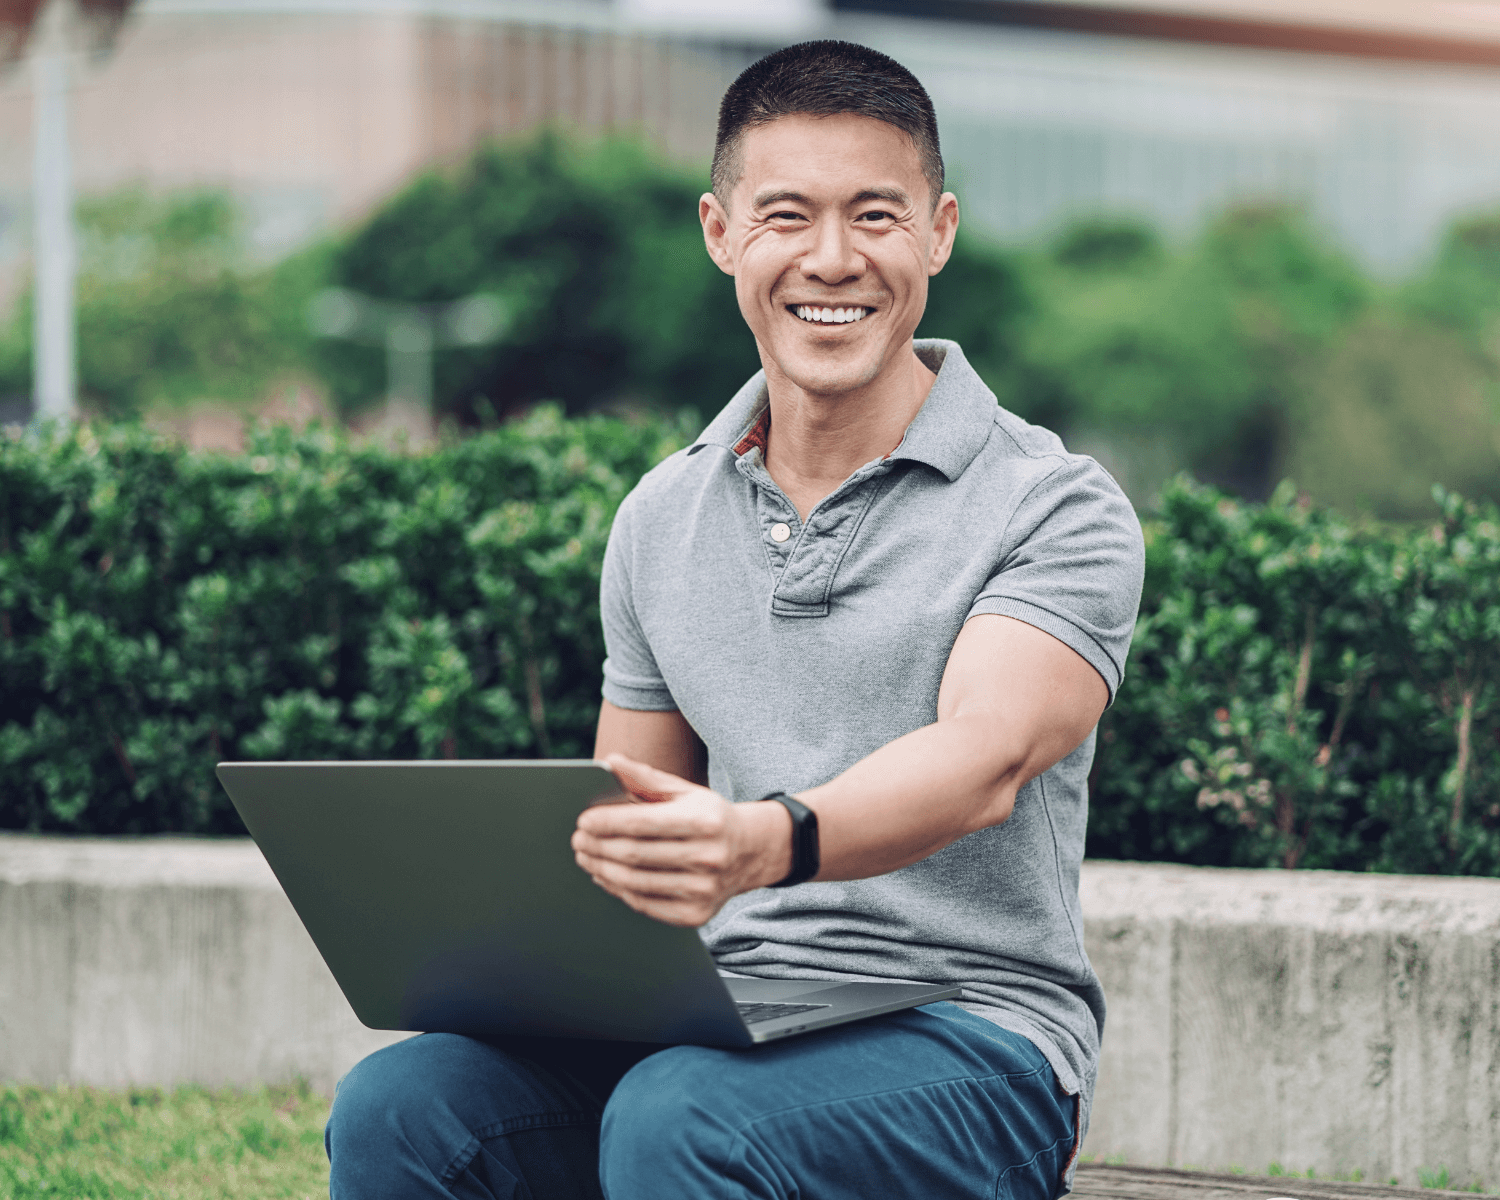 Man wearing grey shirt with laptop looking happy